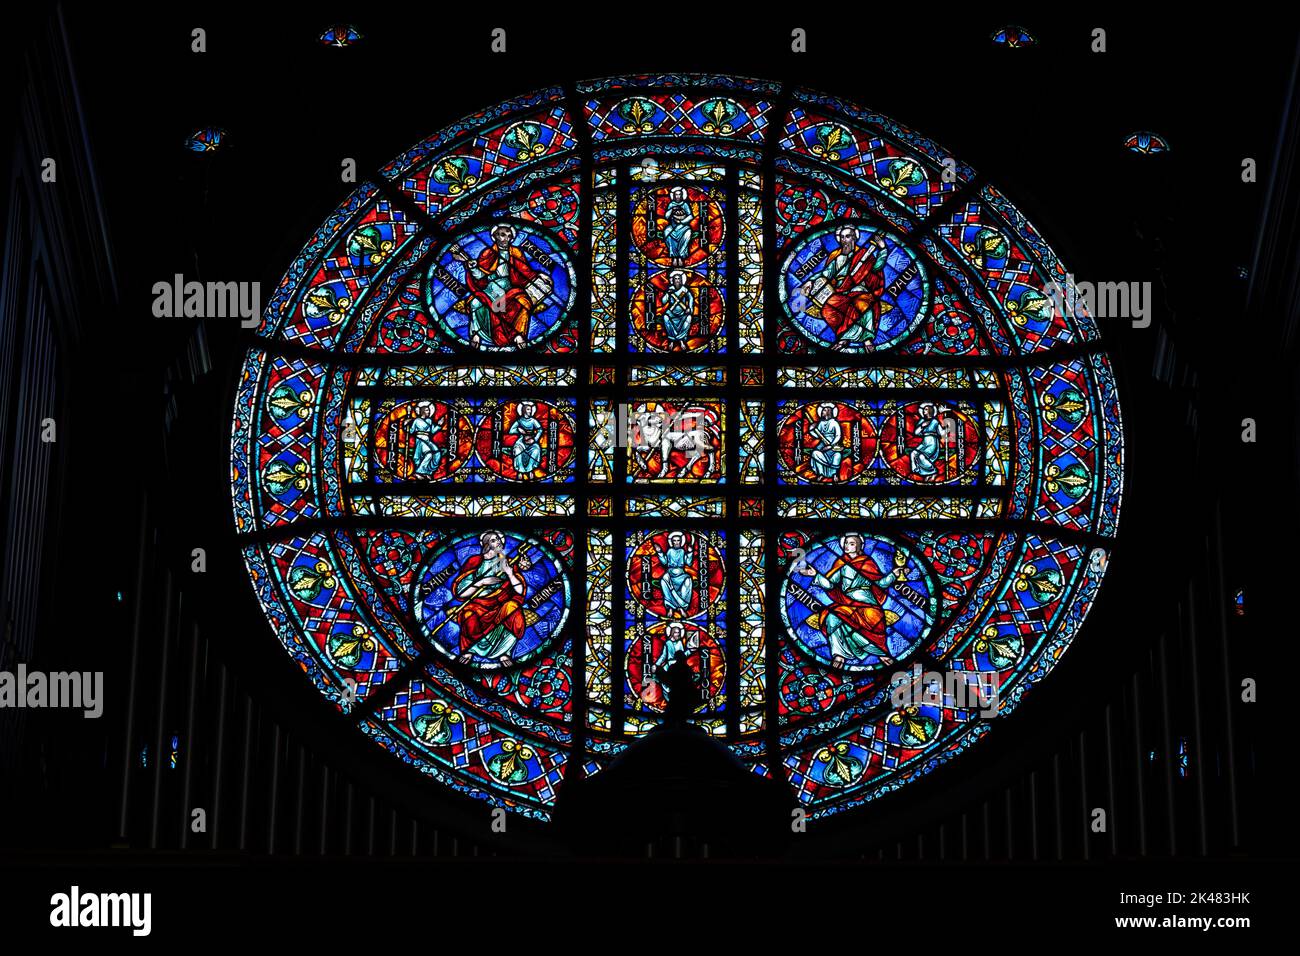 The stained-glass mosaic from the Cathedral of Saint Paul, Minnesota Stock Photo